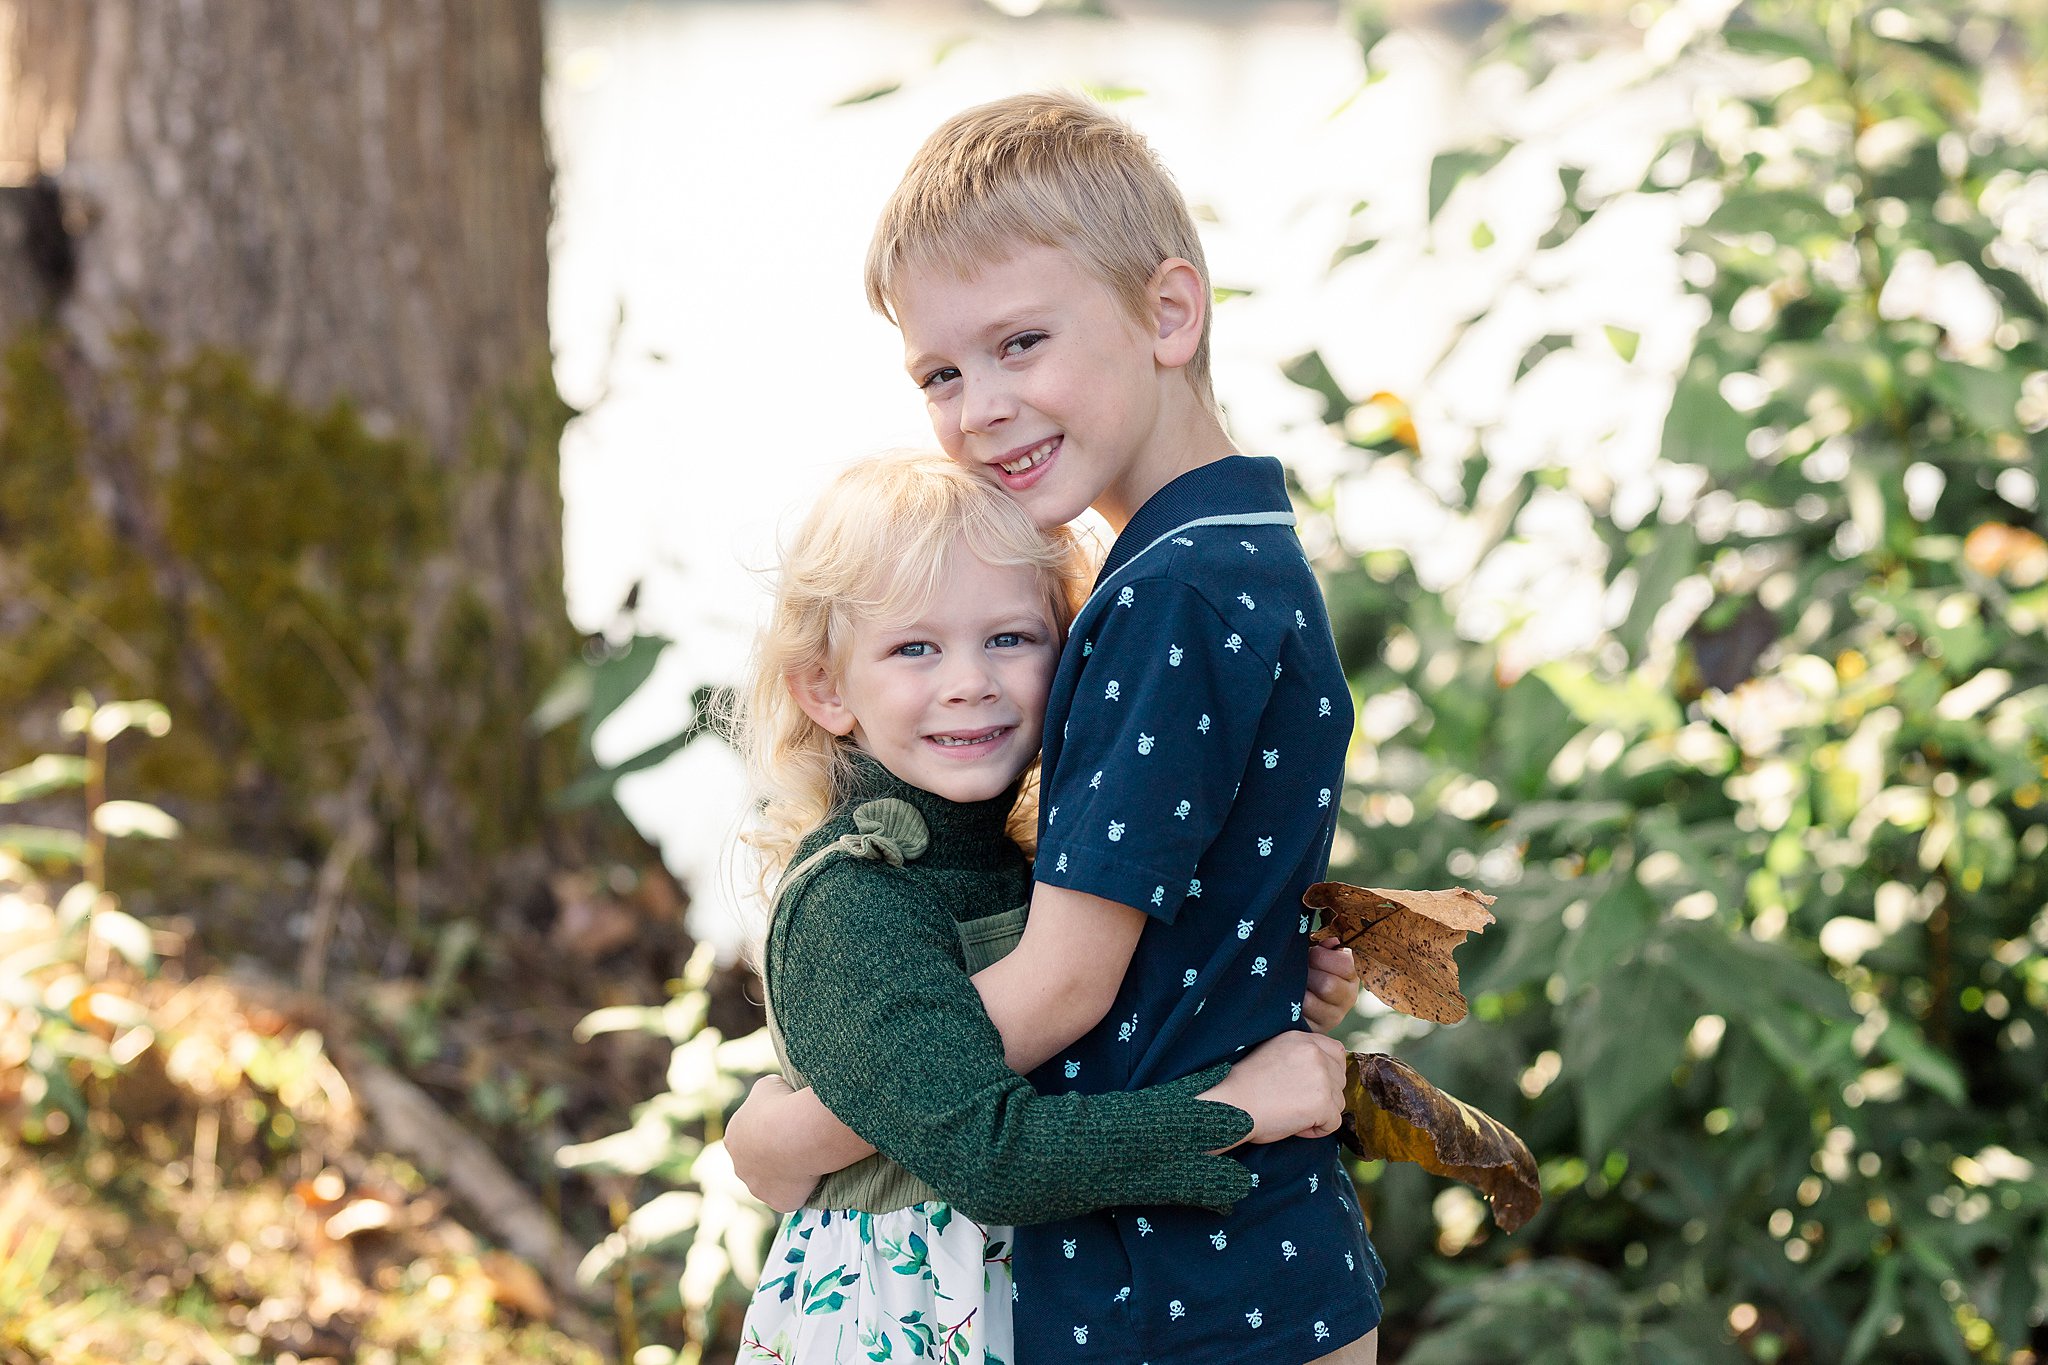 A brother and sister hug in a park while holding some fallen leaves kelowna pediatricians